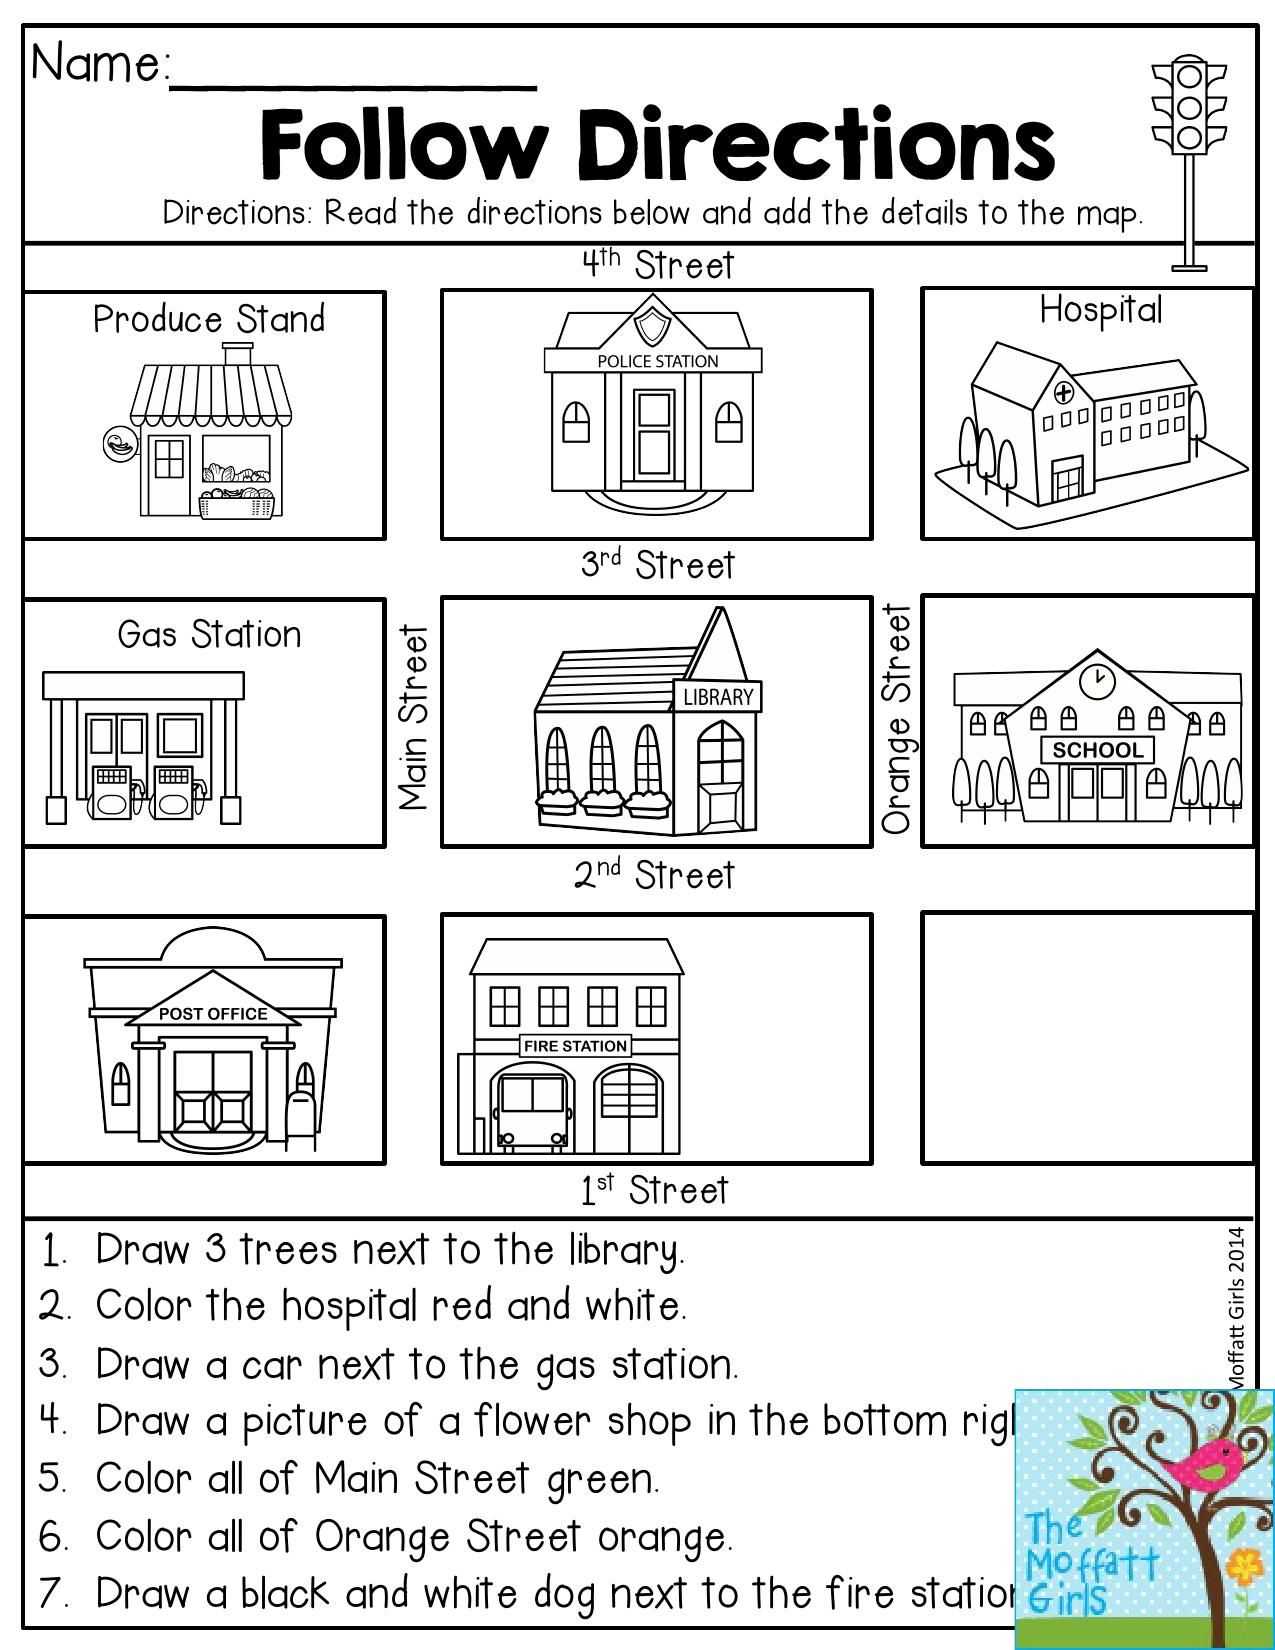 Following Directions Worksheet Middle School Along with Follow Directions Read the Directions and Add the Details to the